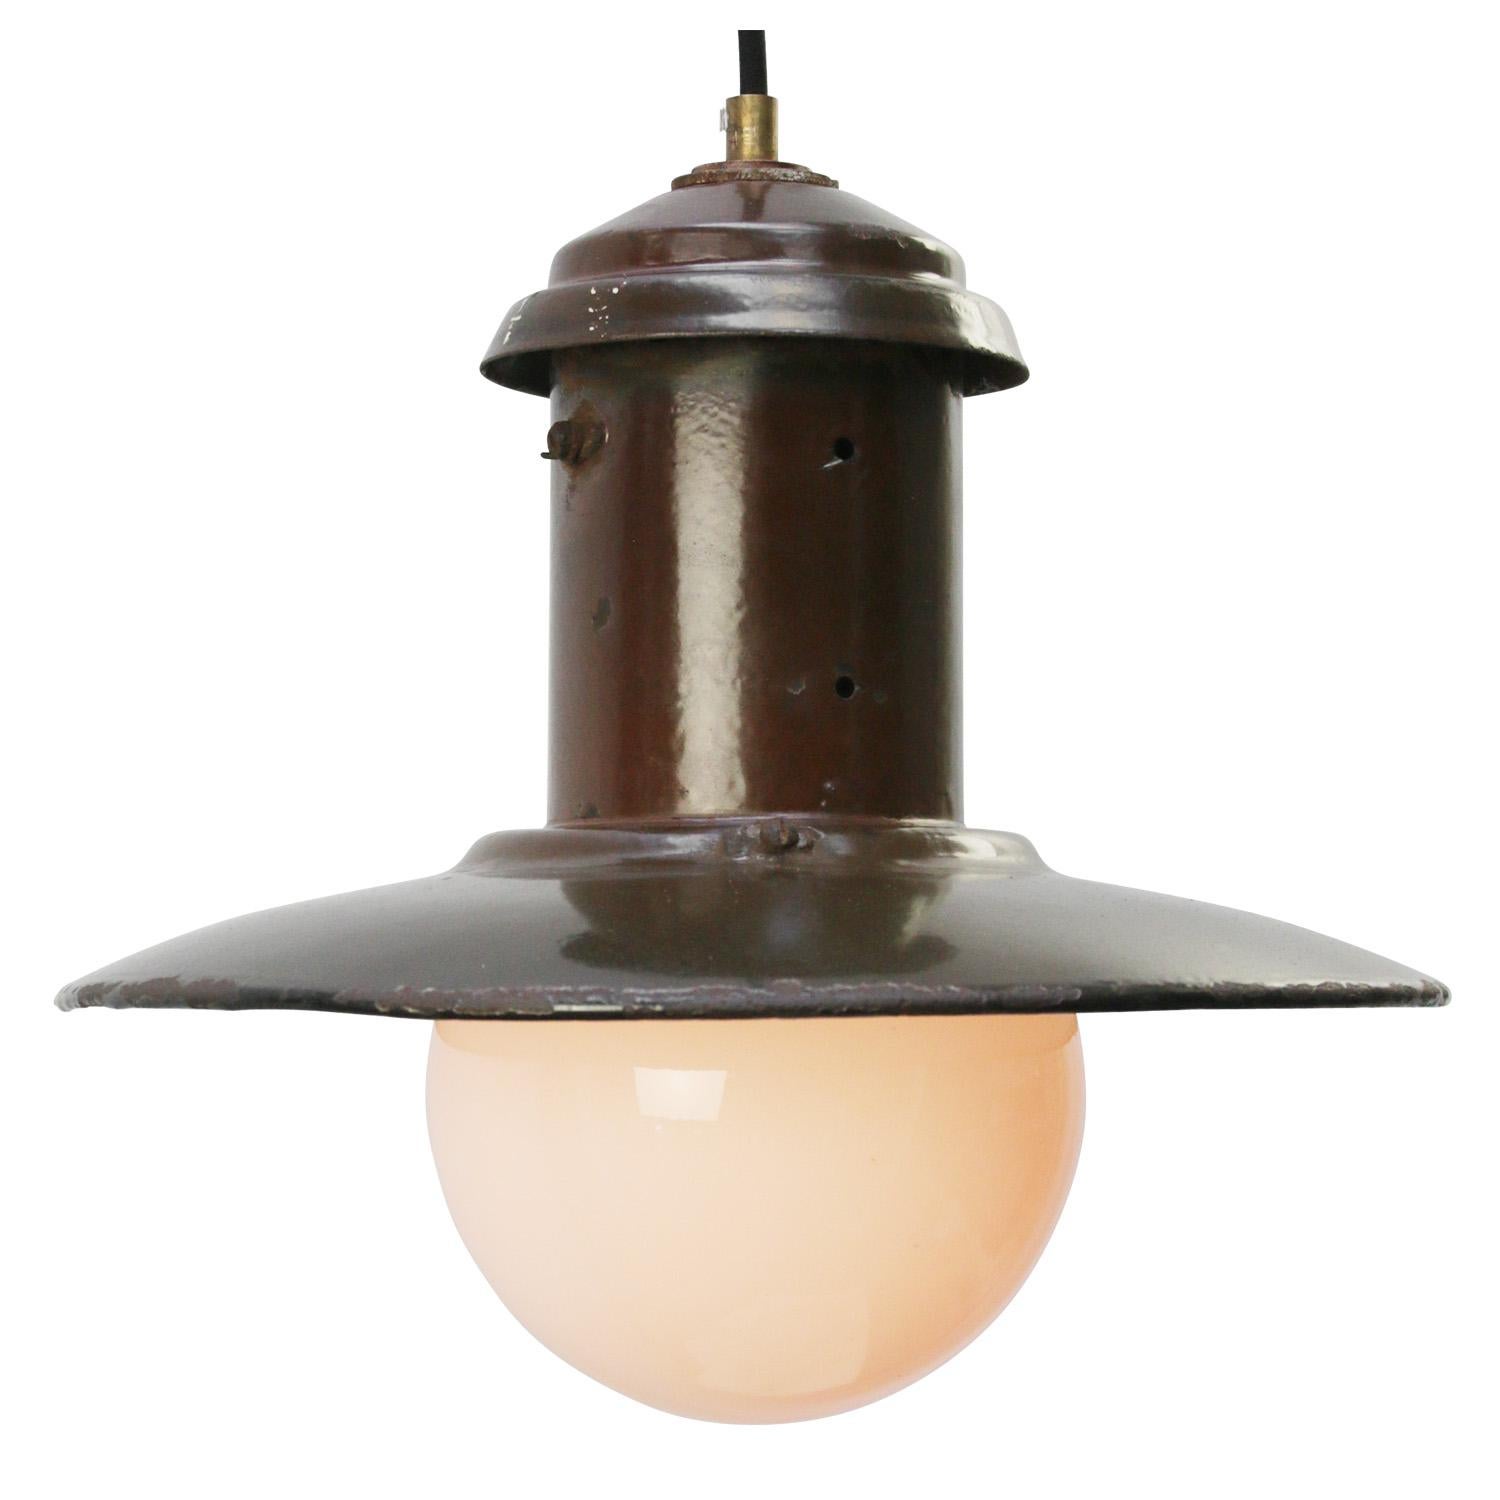 Brown enamel factory pendant from 1967
White inside. White opaline glass

Diameter glass 15 cm

Weight : 1.60 kg / 3.5 lb

Priced per individual item. All lamps have been made suitable by international standards for incandescent light bulbs,